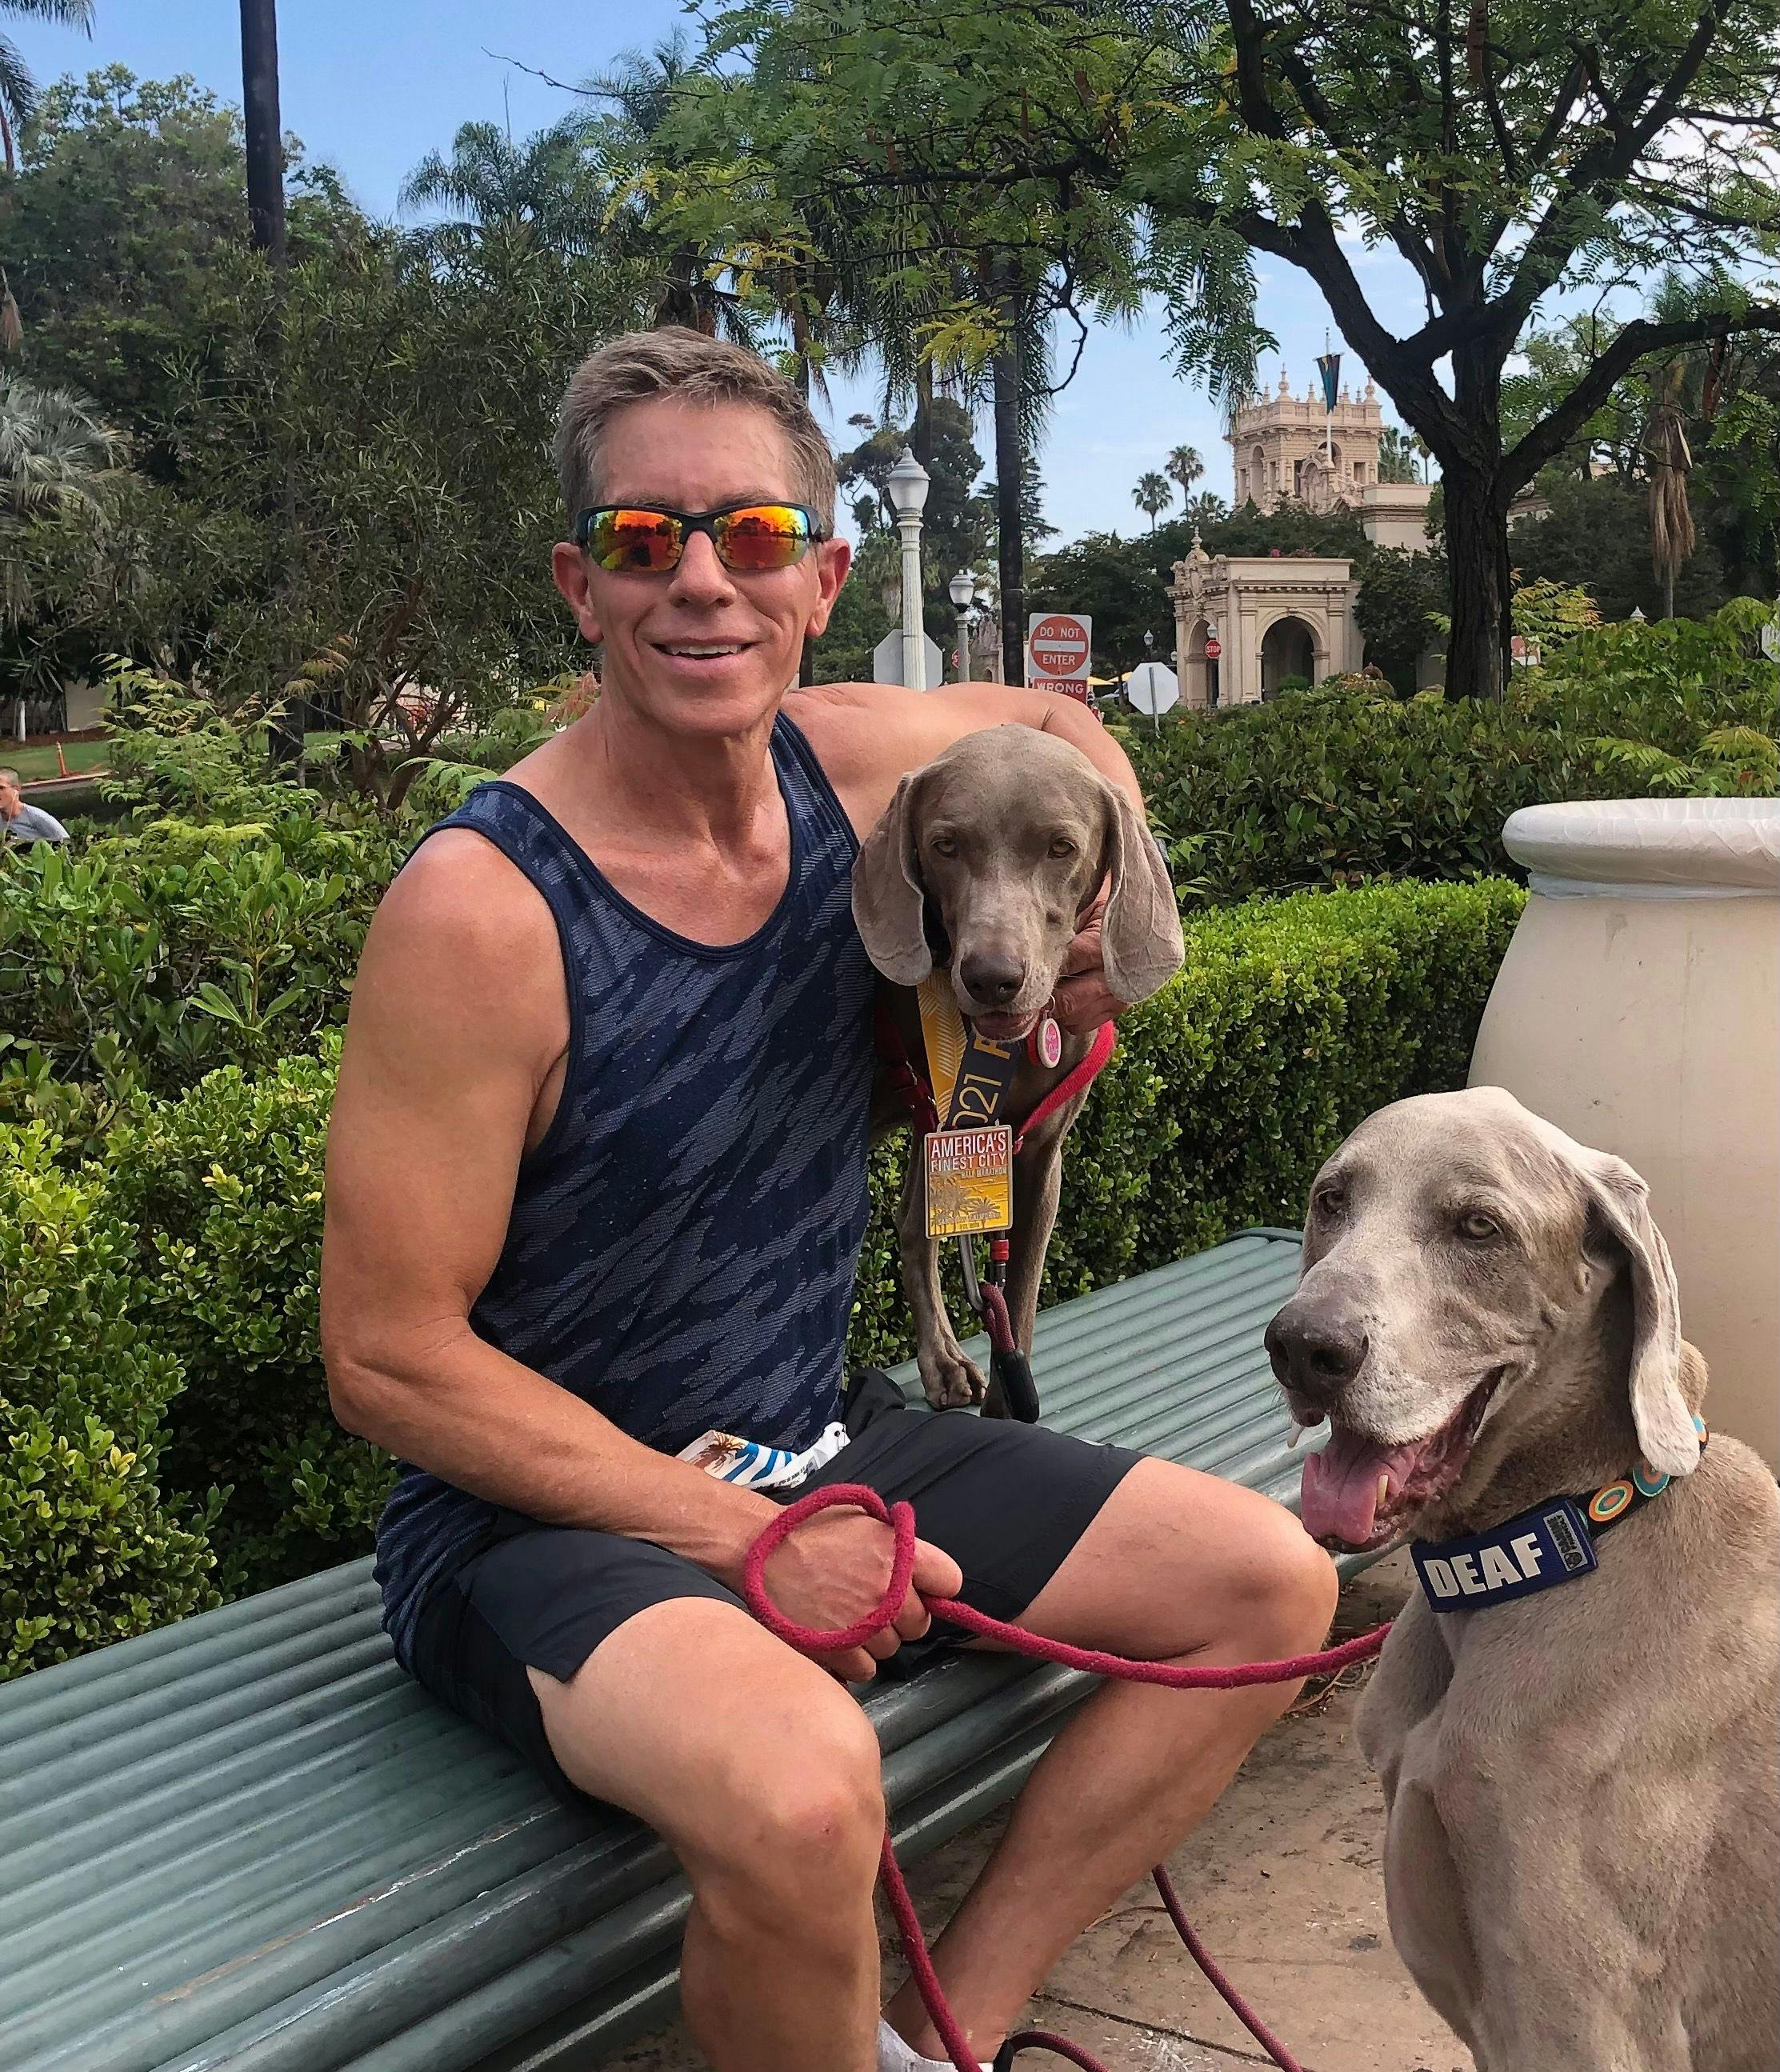 Mack after his most recent race, with his Weimaraners of course.